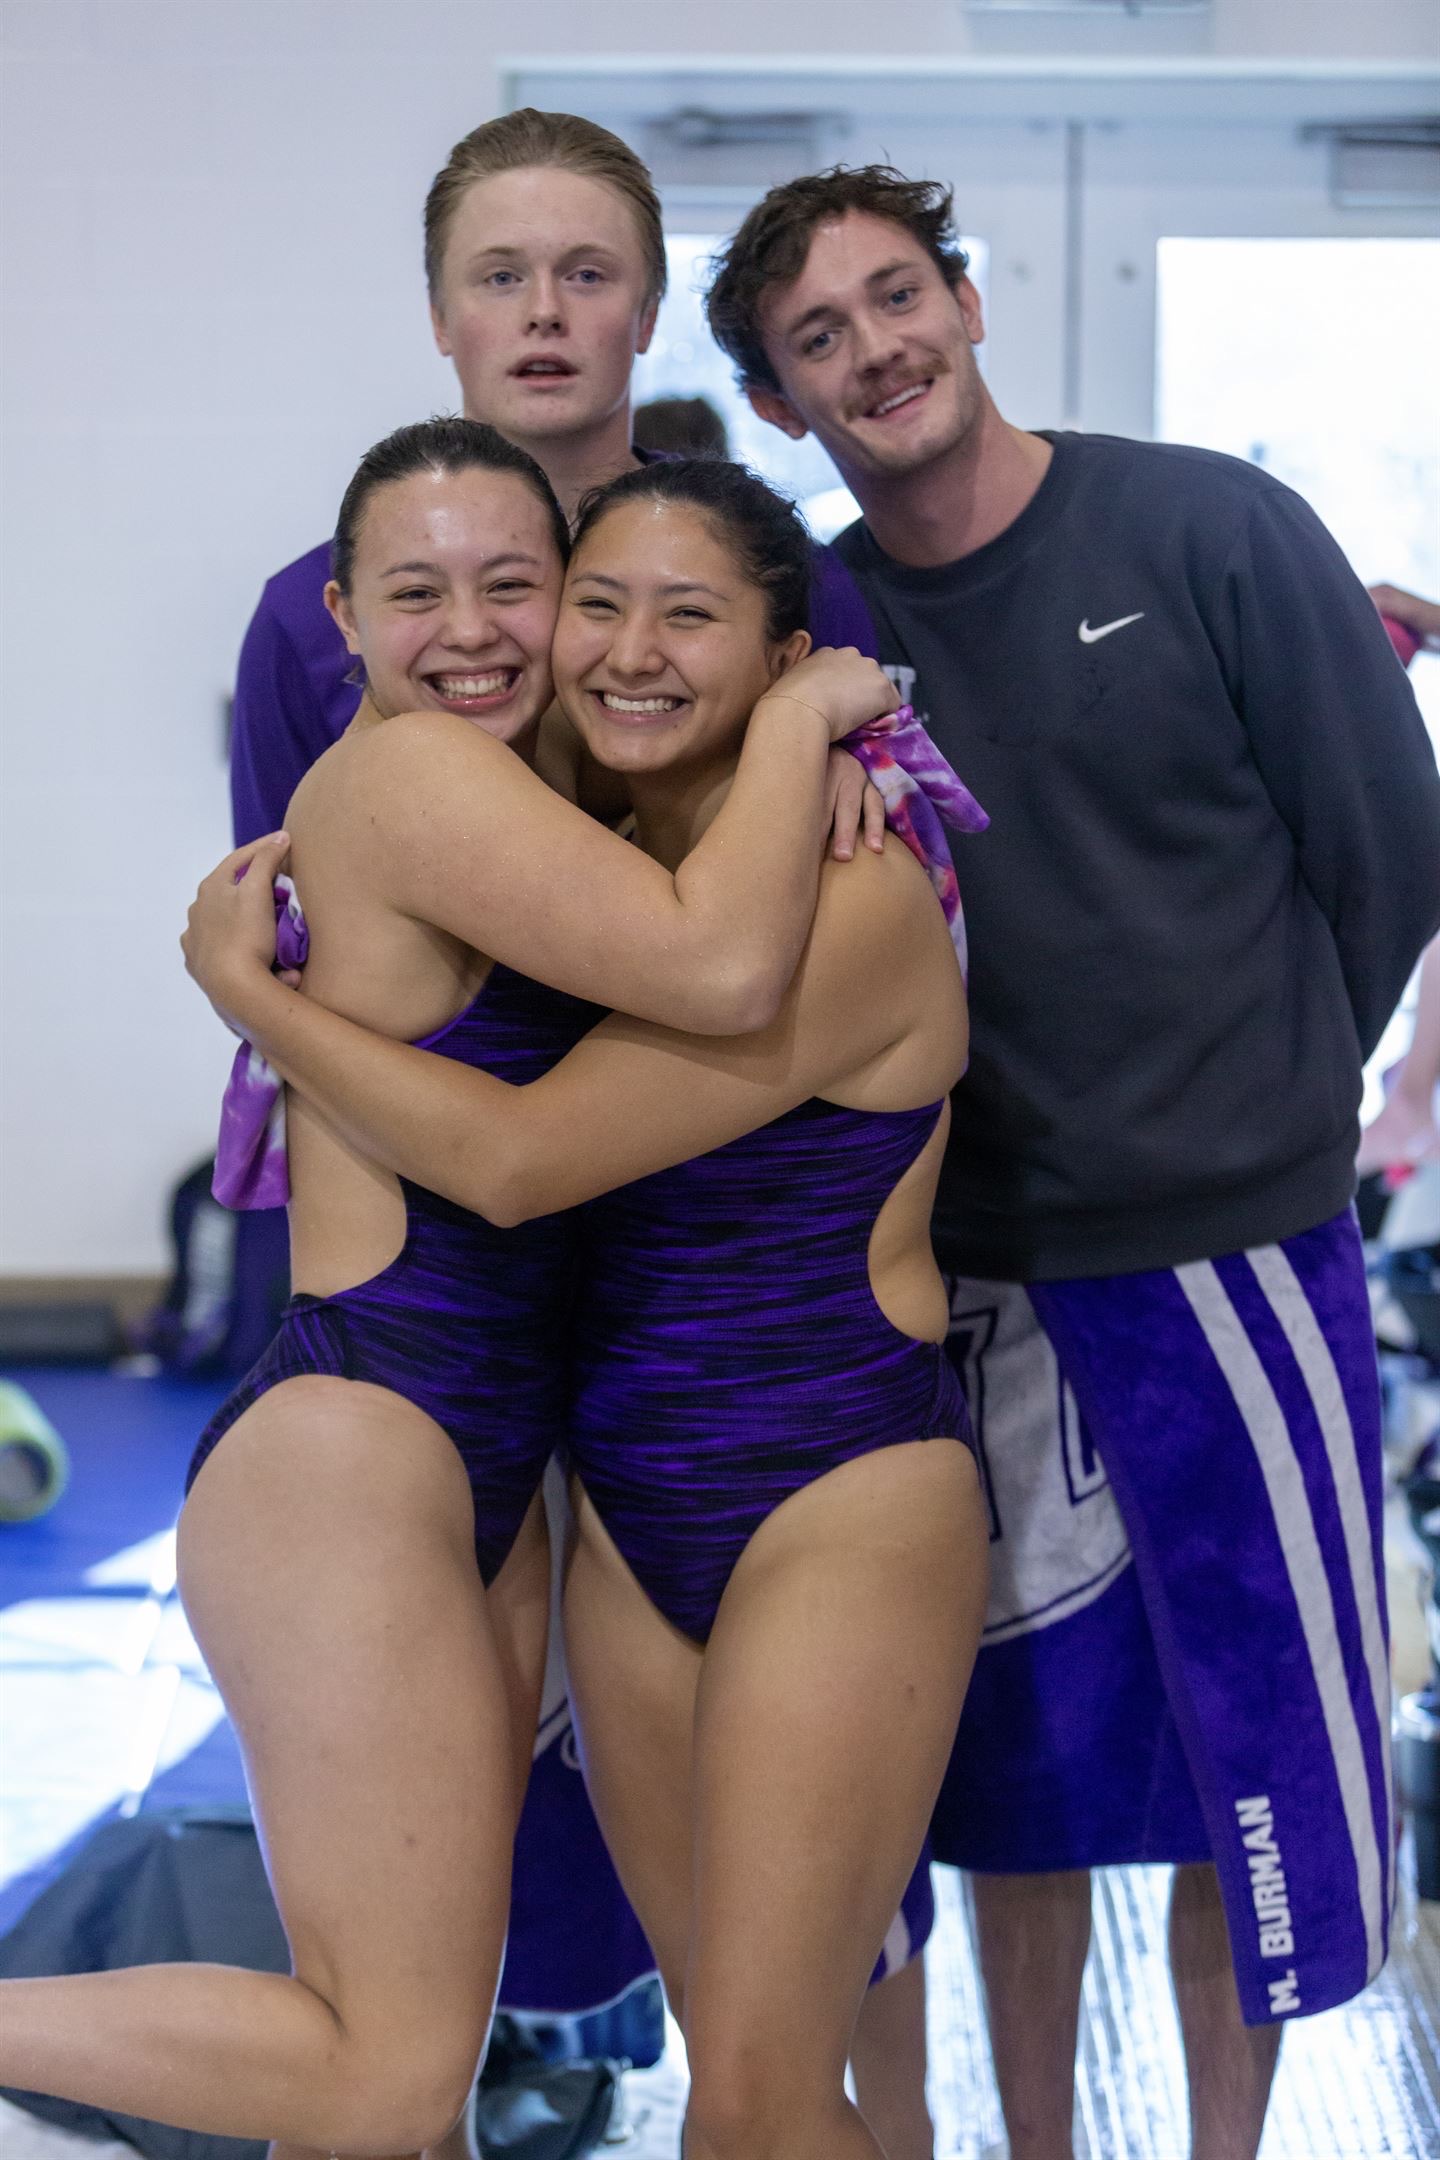 Gracie and her teammates hugging after a swim and dive competition